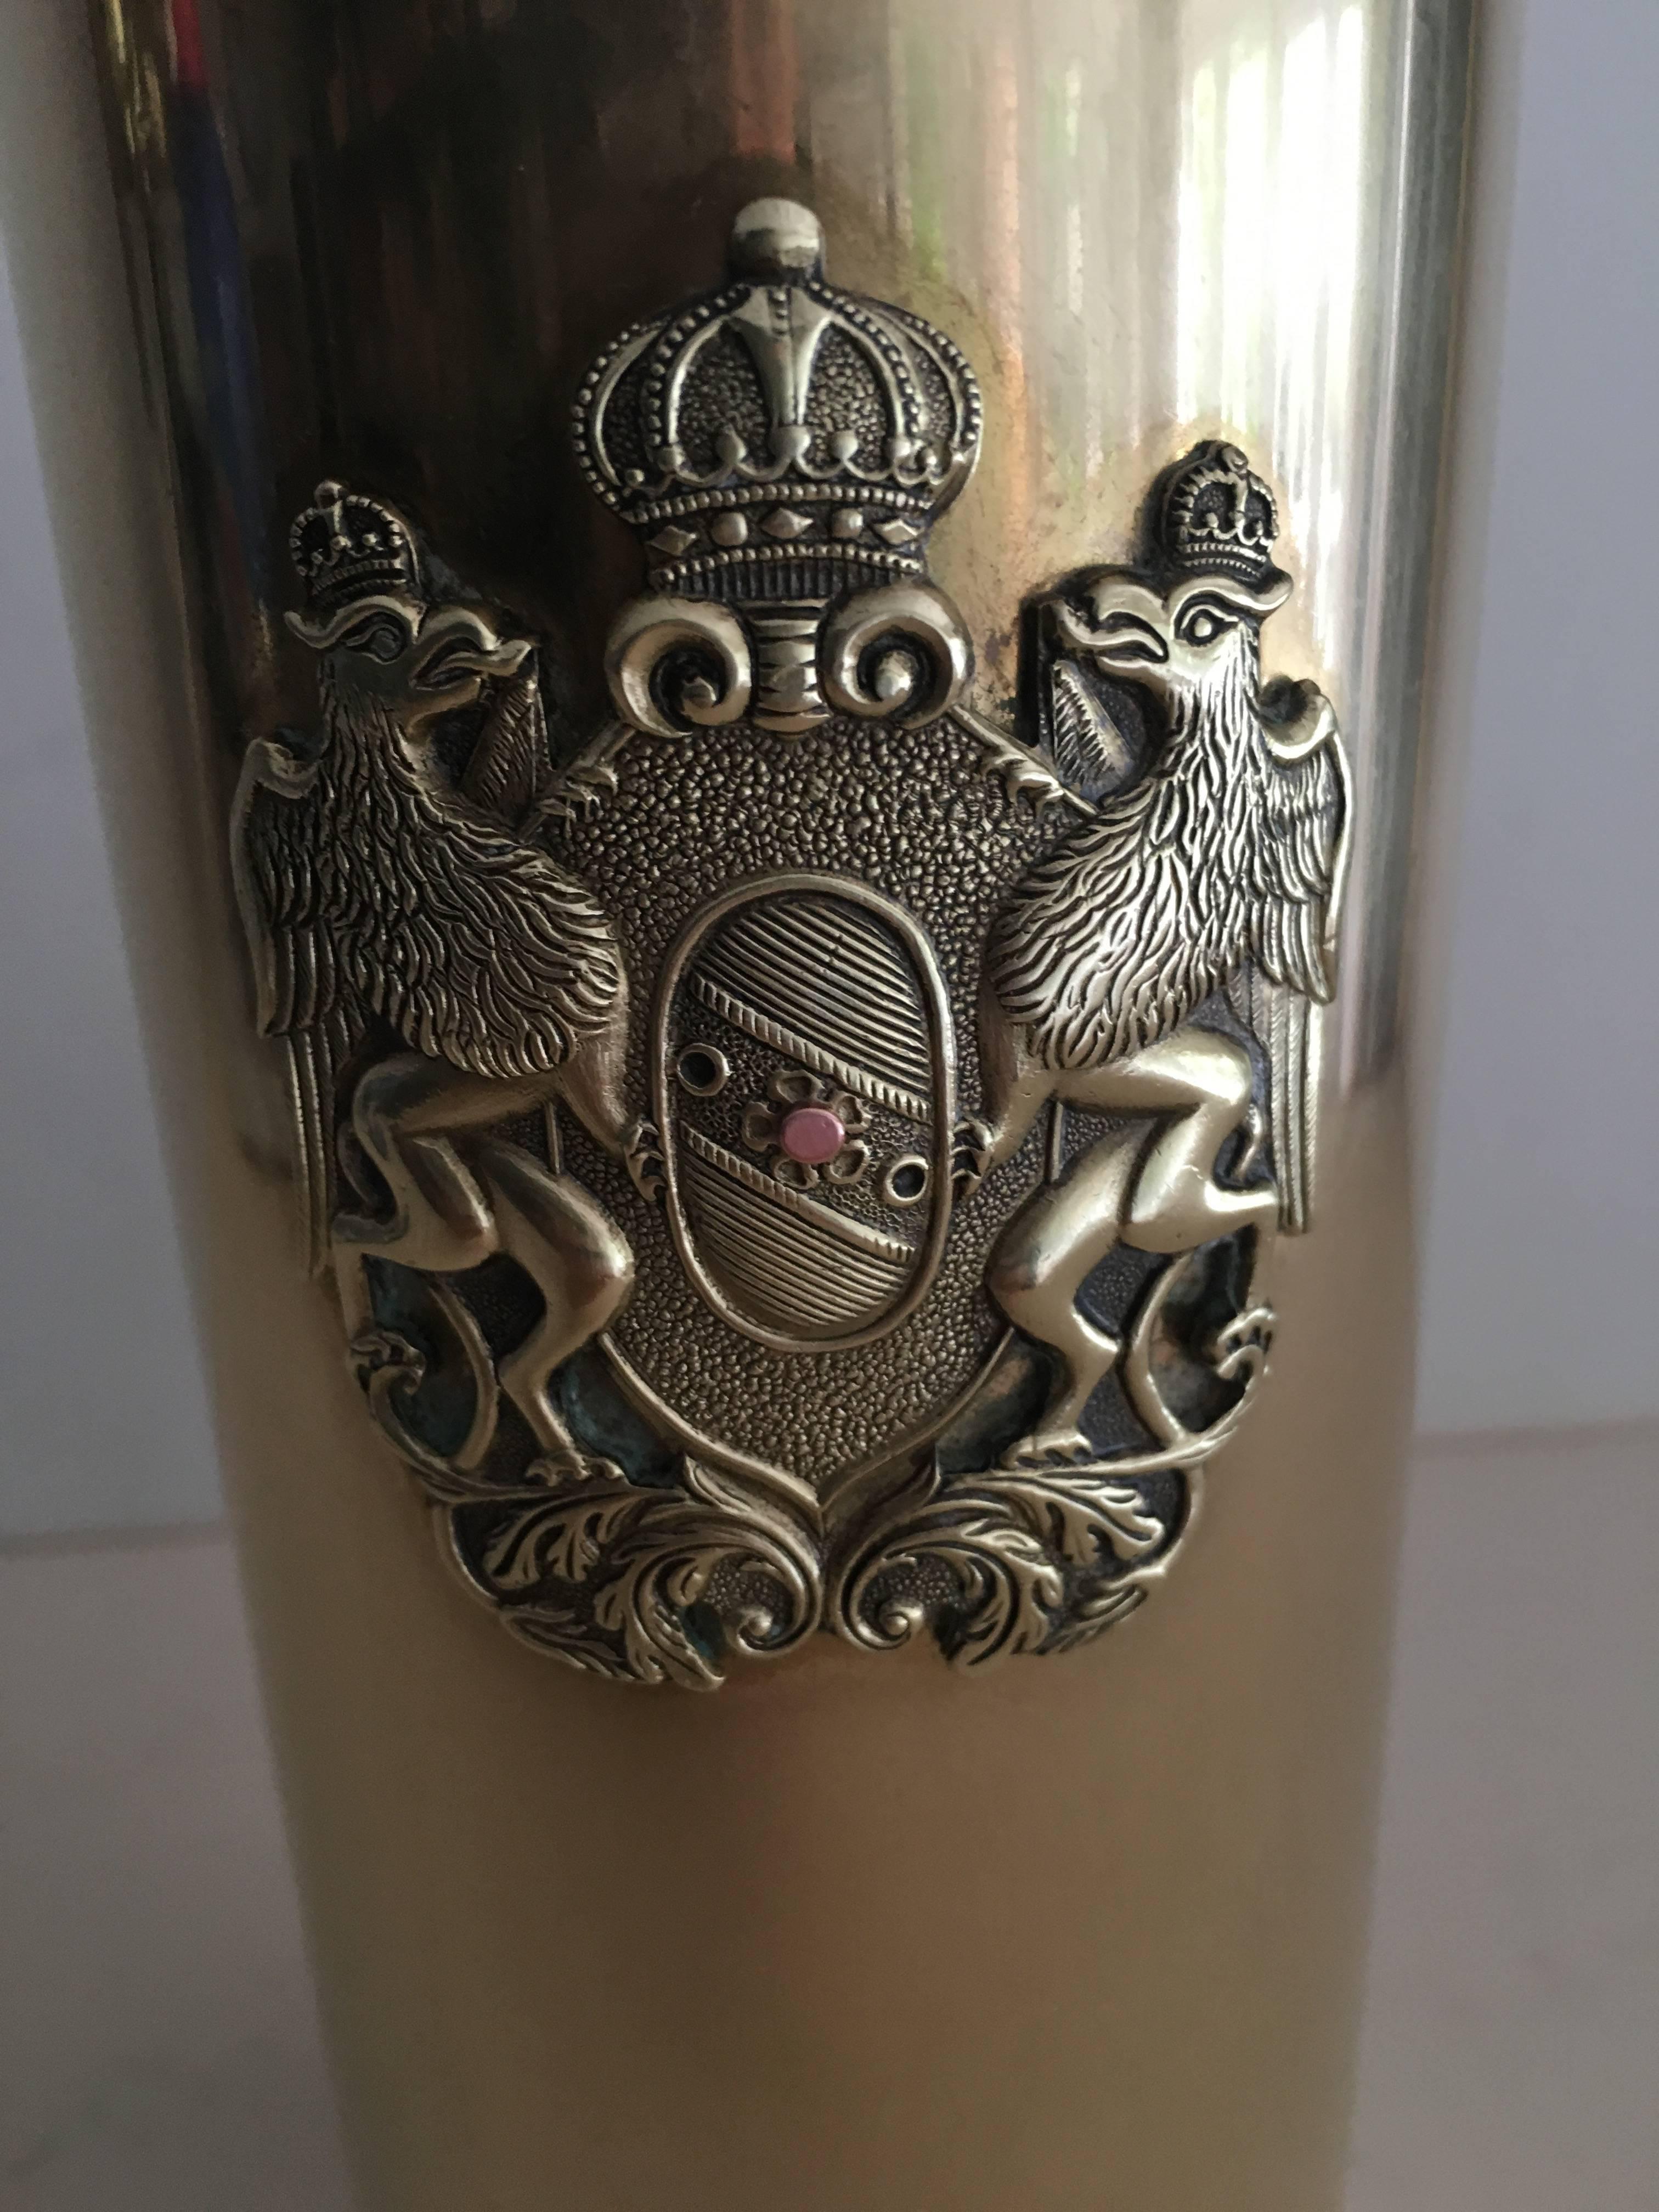 Italian brass canister with crest and wooden top - perfect for storage, or decorative piece in office or den... store your prized English tea too!